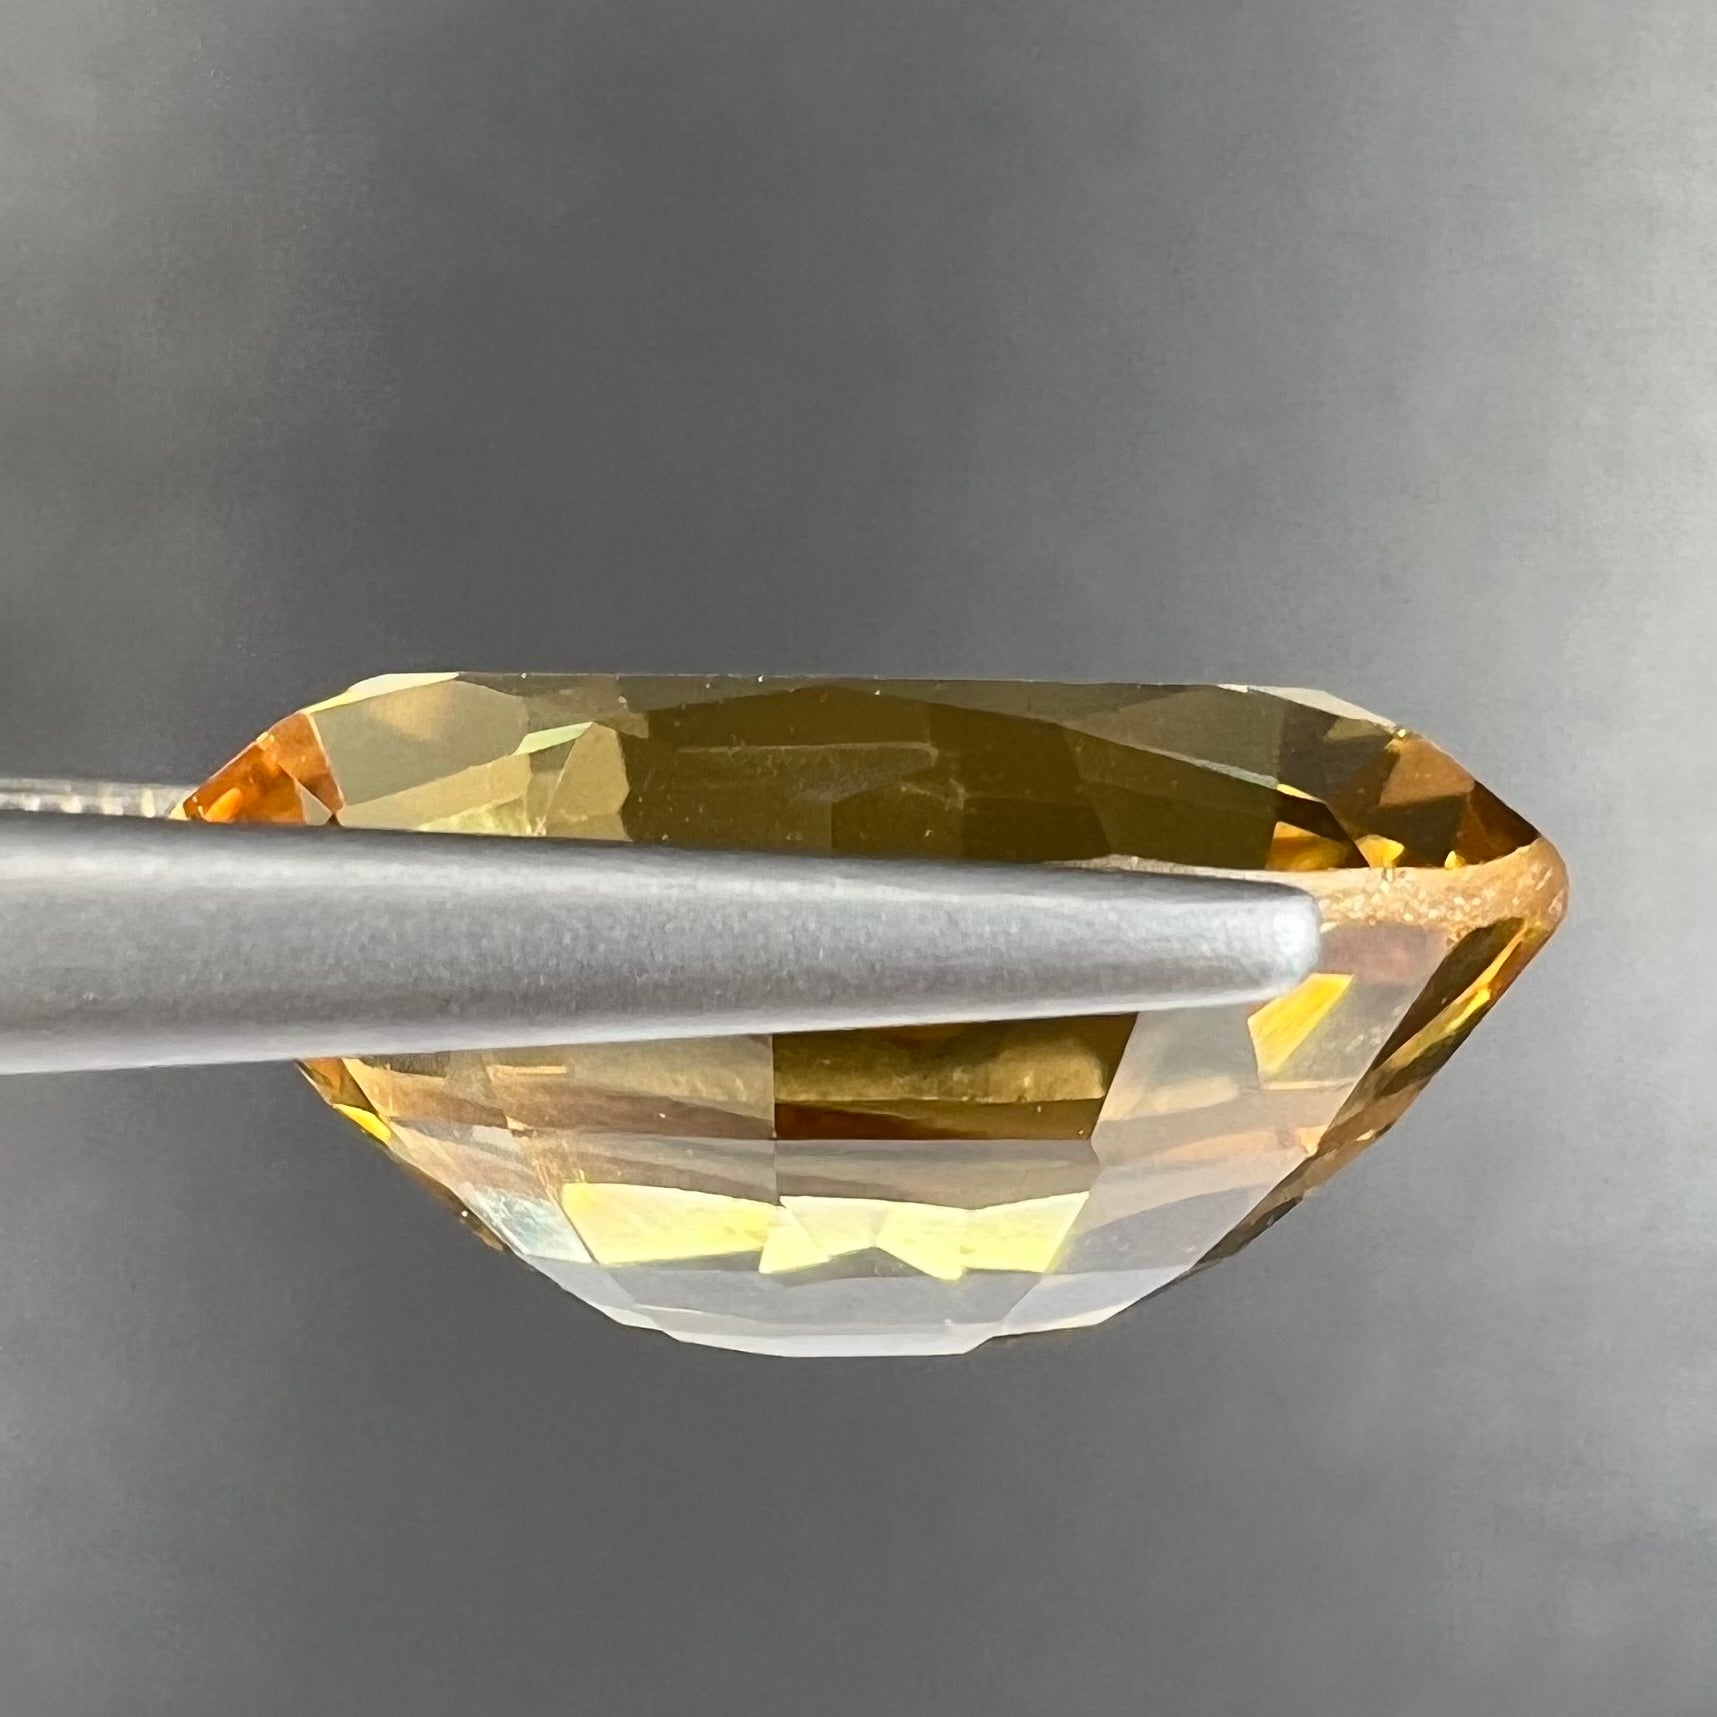 A loose, faceted oval cut golden beryl gemstone.